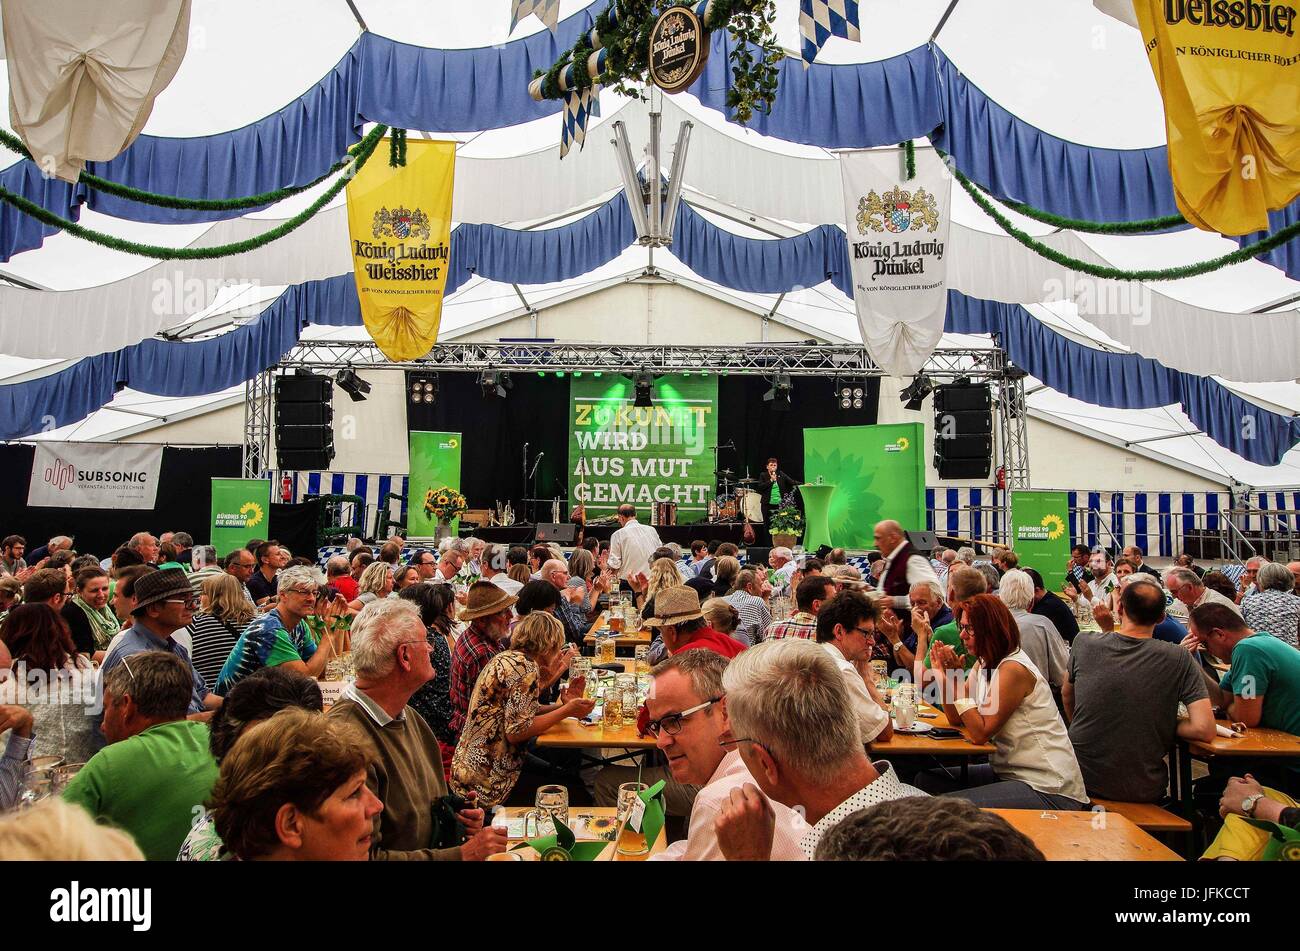 Tutzing, Bayern, Germany. 1st July, 2017. Green politician Cem Ã–zdemir captivated an audience of over 800 as he visited the Munich area to make a 'Fruehschoppen'' appearance at a festival tent in nearby Tutzing. In mainly southern German and Austrian culture, Fruehschoppen is the tradition of having an alcoholic beverage before noon. Furthermore, he served as guest speaker of the event in addition to Bavarian Landtag member Katharina Schulze. Ã–zdemir is renowned and highly-skilled orator.Ã–zdemir was a German Bundestag member from 1994-2002 and again since 2013. Credit: ZUMA Press, Inc./Ala Stock Photo